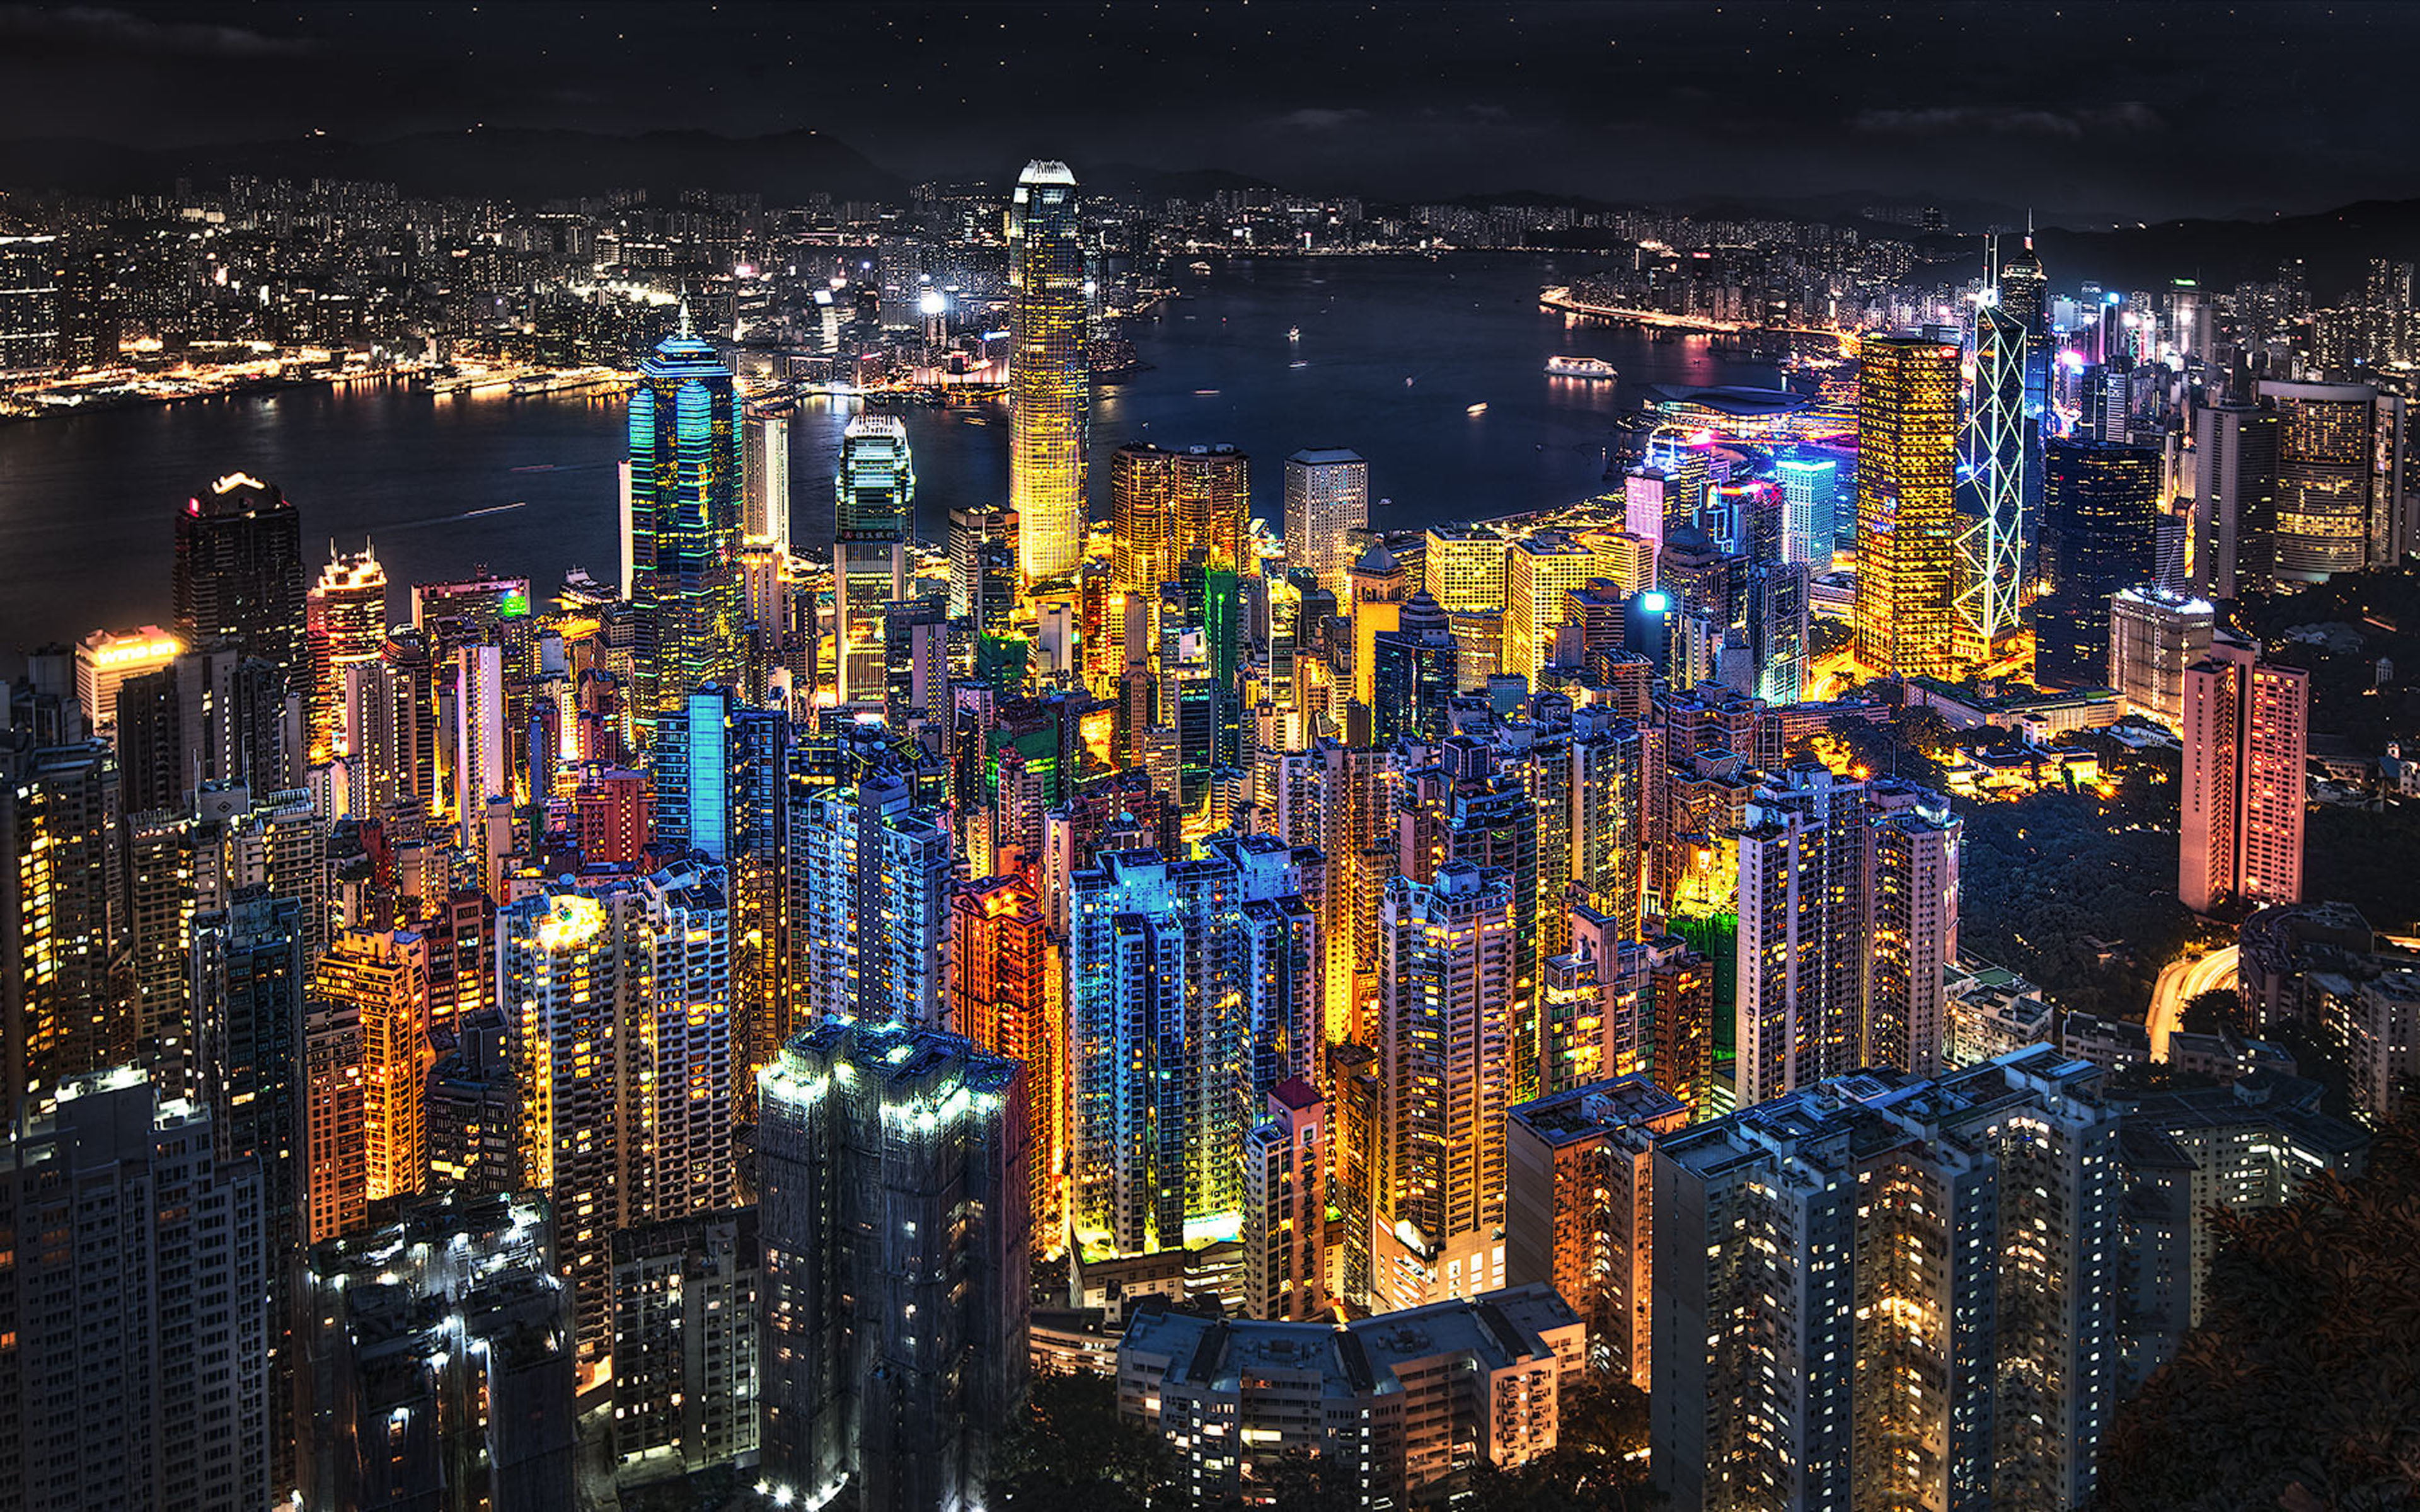 Hong Kong In The Night Lights From The Skyscraper From The Top Of The Uk Hong Hd Hd Hd Wallpapers For Desktop Mobile Phones And Laptop 3840×2400